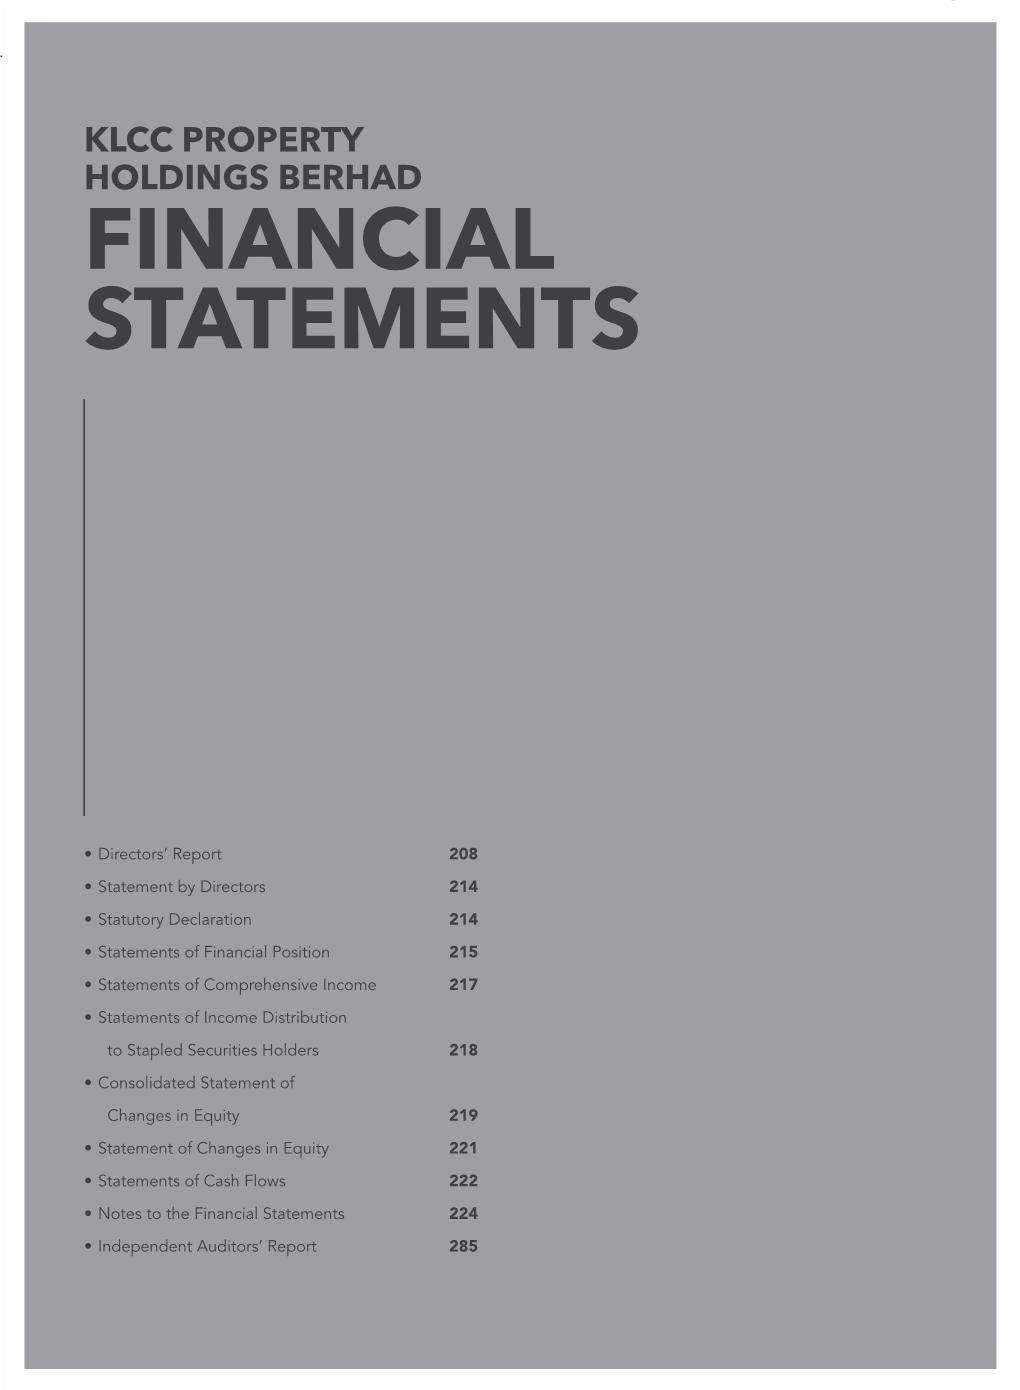 Financial Statements 224 • Independent Auditors’ Report 285